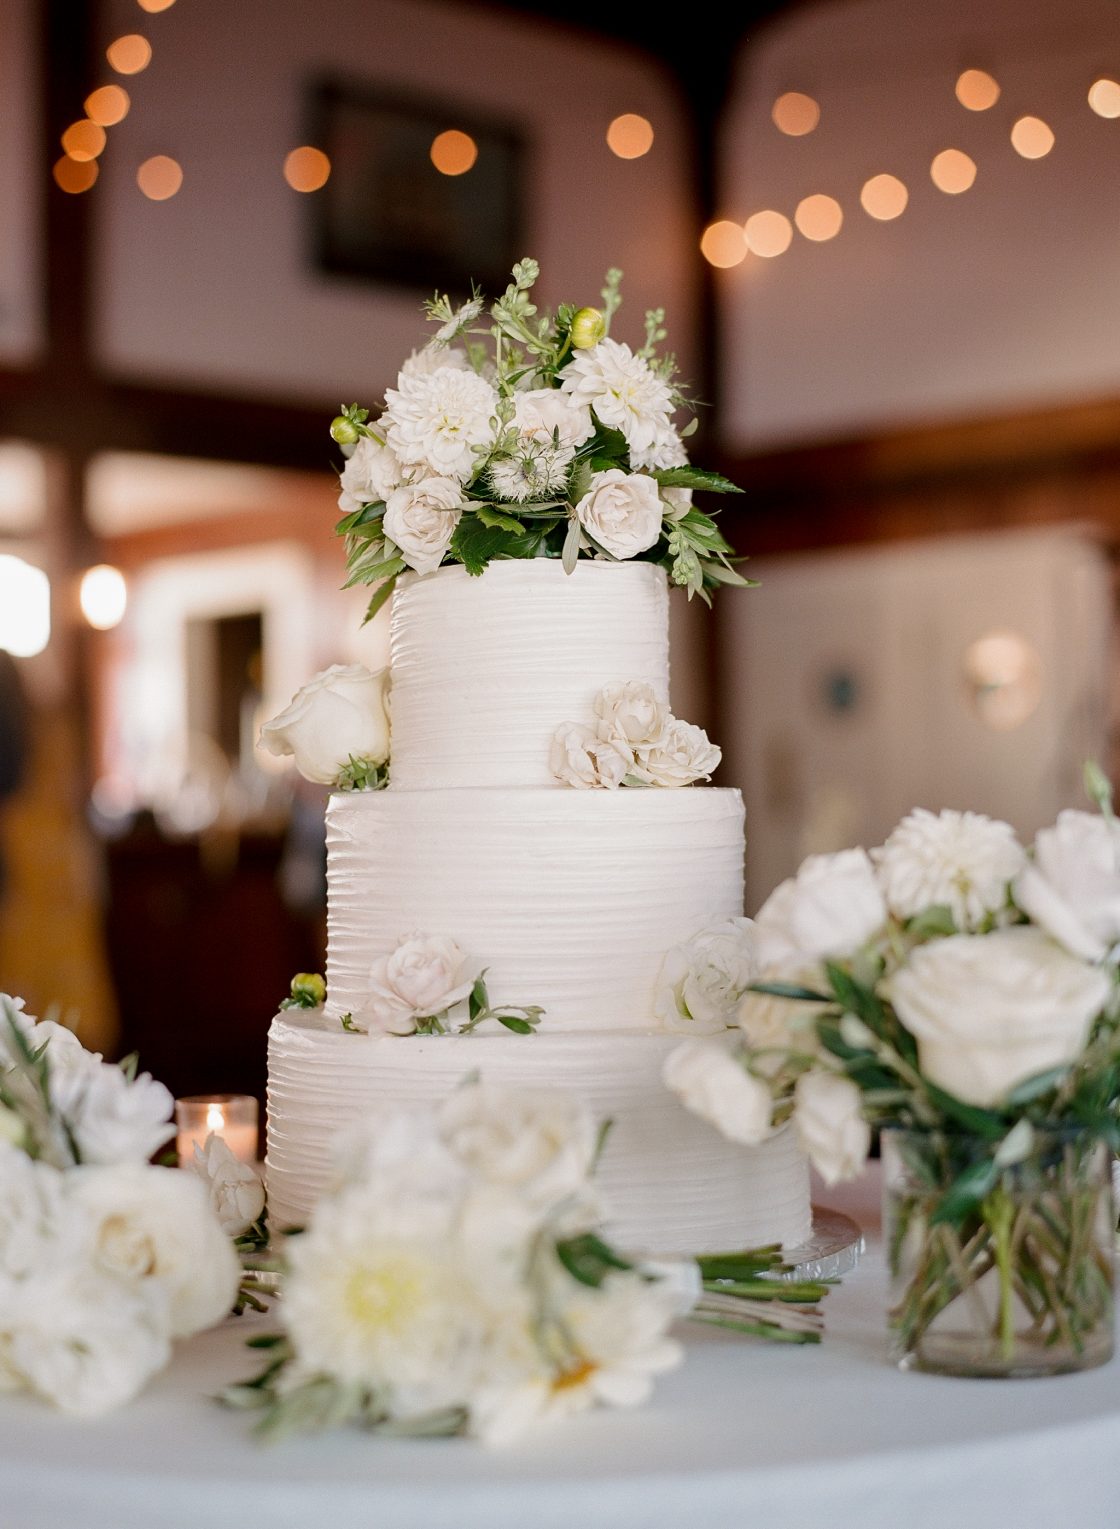 Classic White Wedding Cake with Flowers